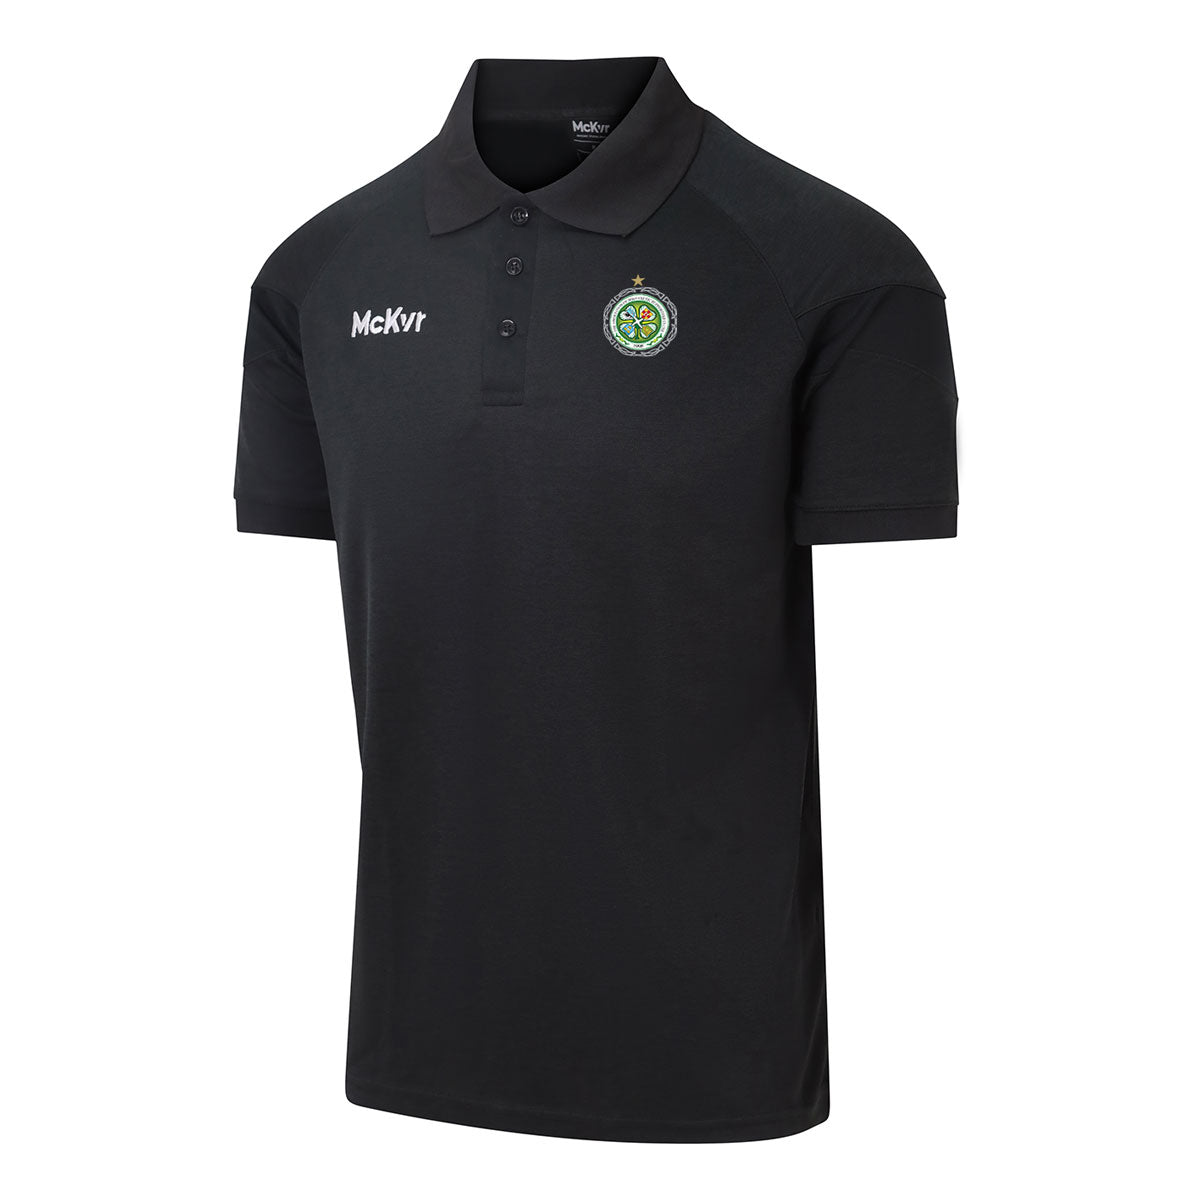 Mc Keever The Association of Irish Celtic Supporters Clubs Core 22 Polo Top - Adult - Black